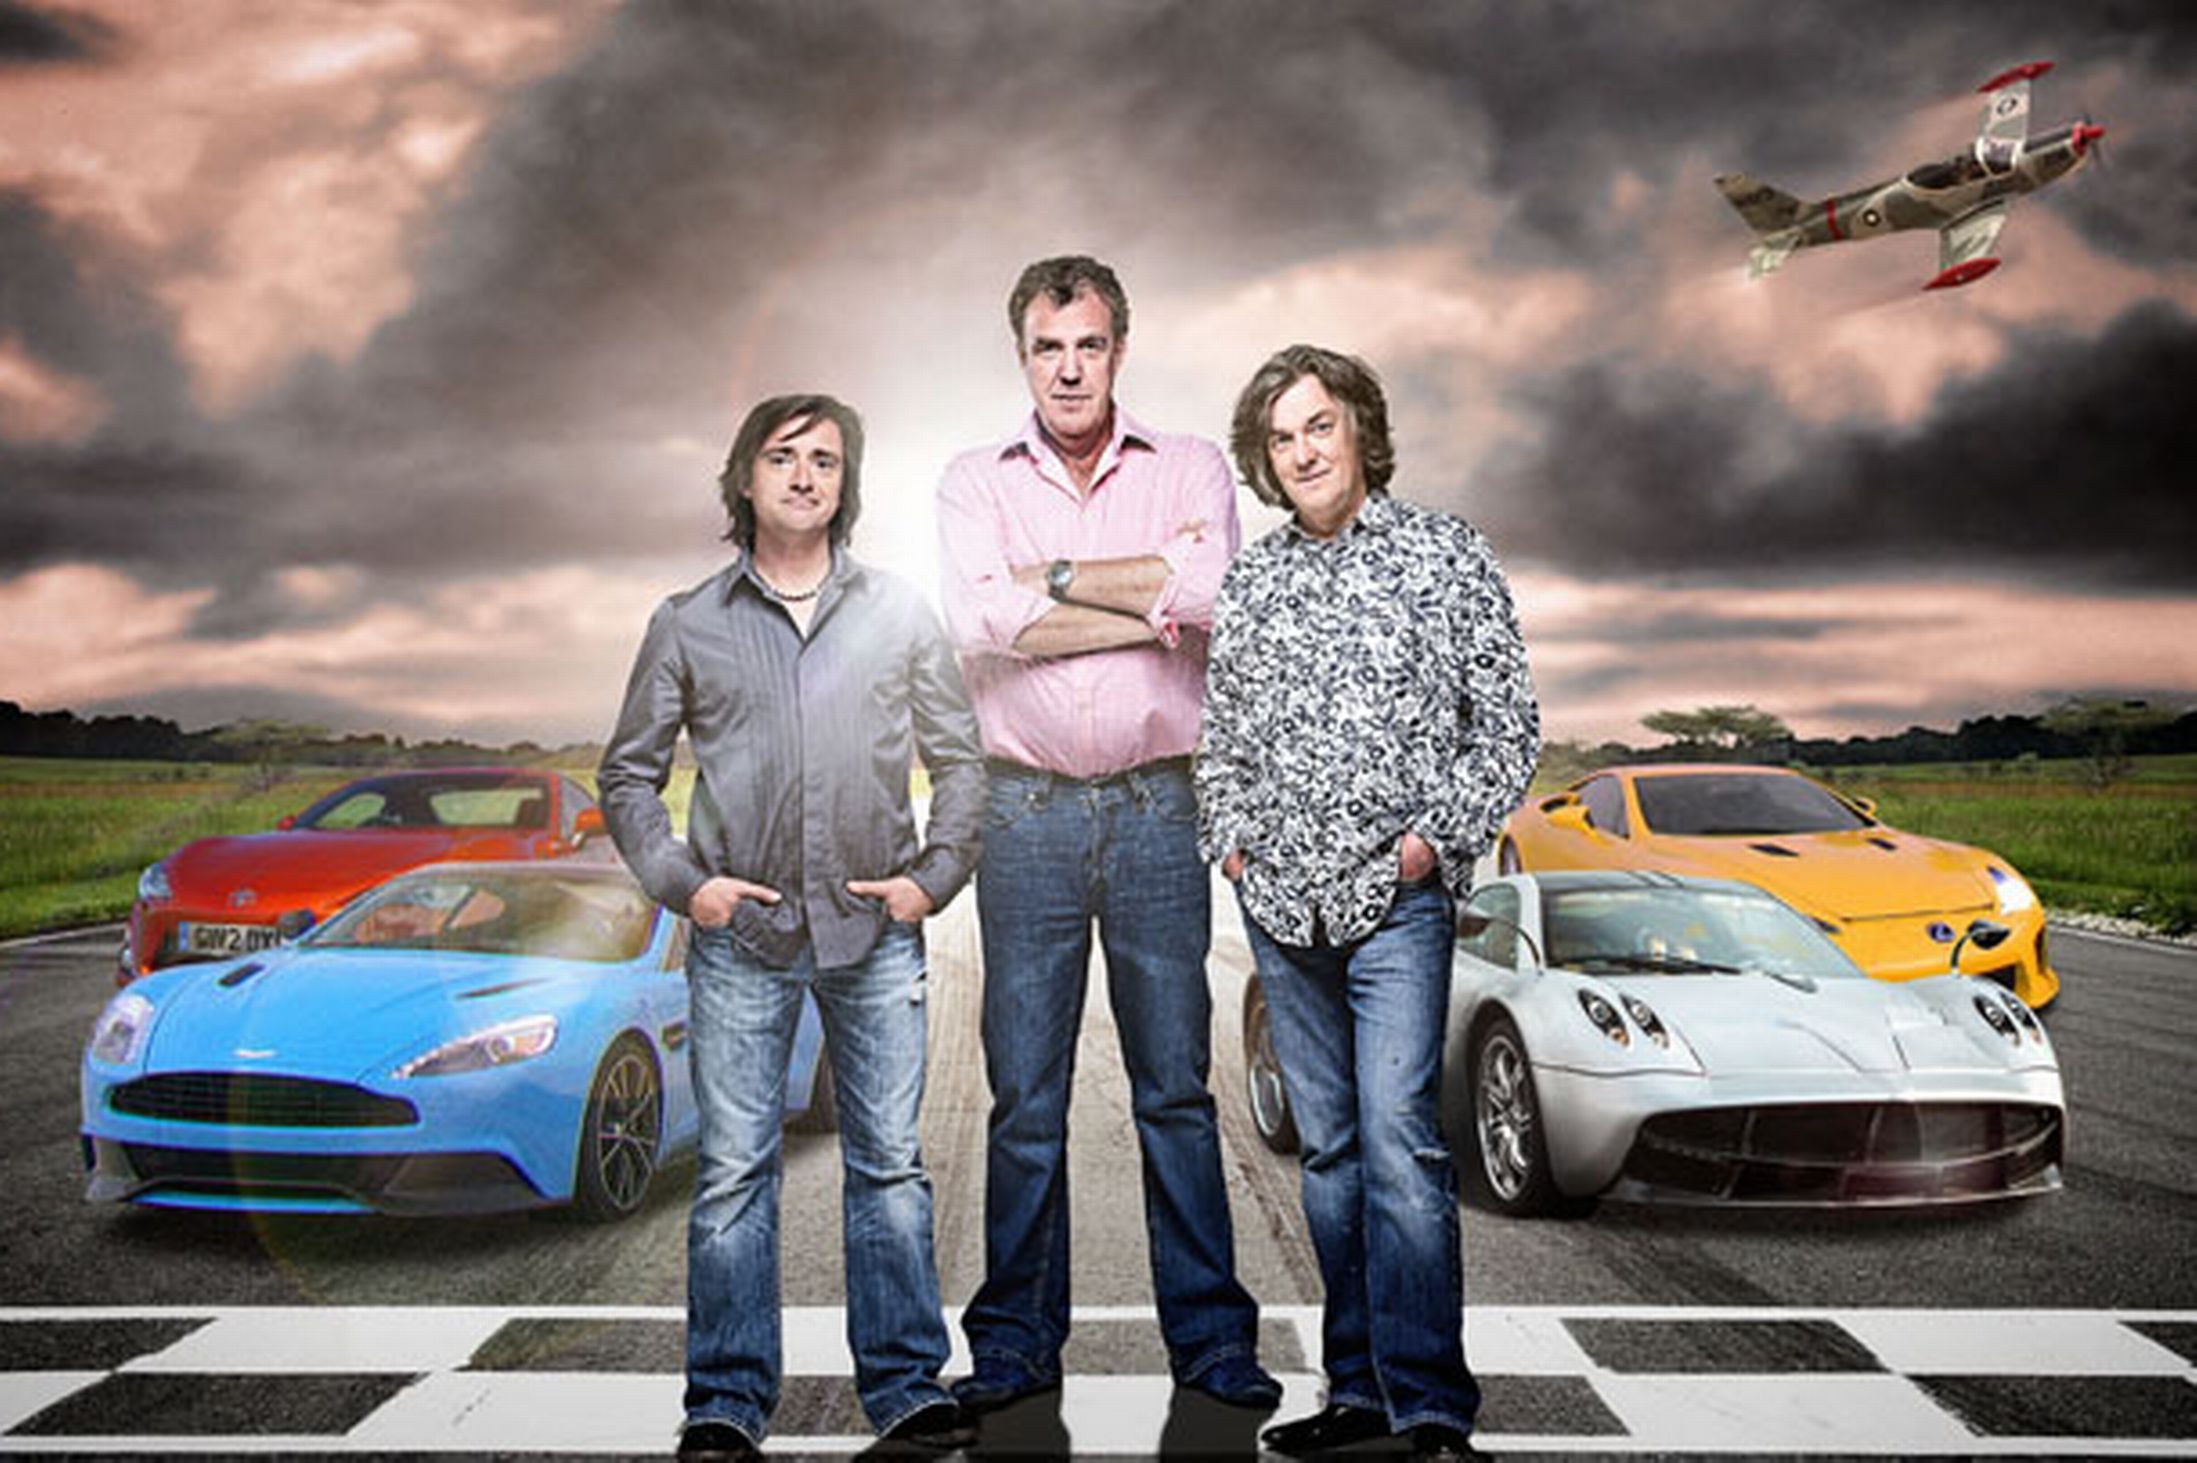 Top Gear' Season 22 Final Three Gone For Good? May And Hammond Refuse To Complete Filming [REPORT]